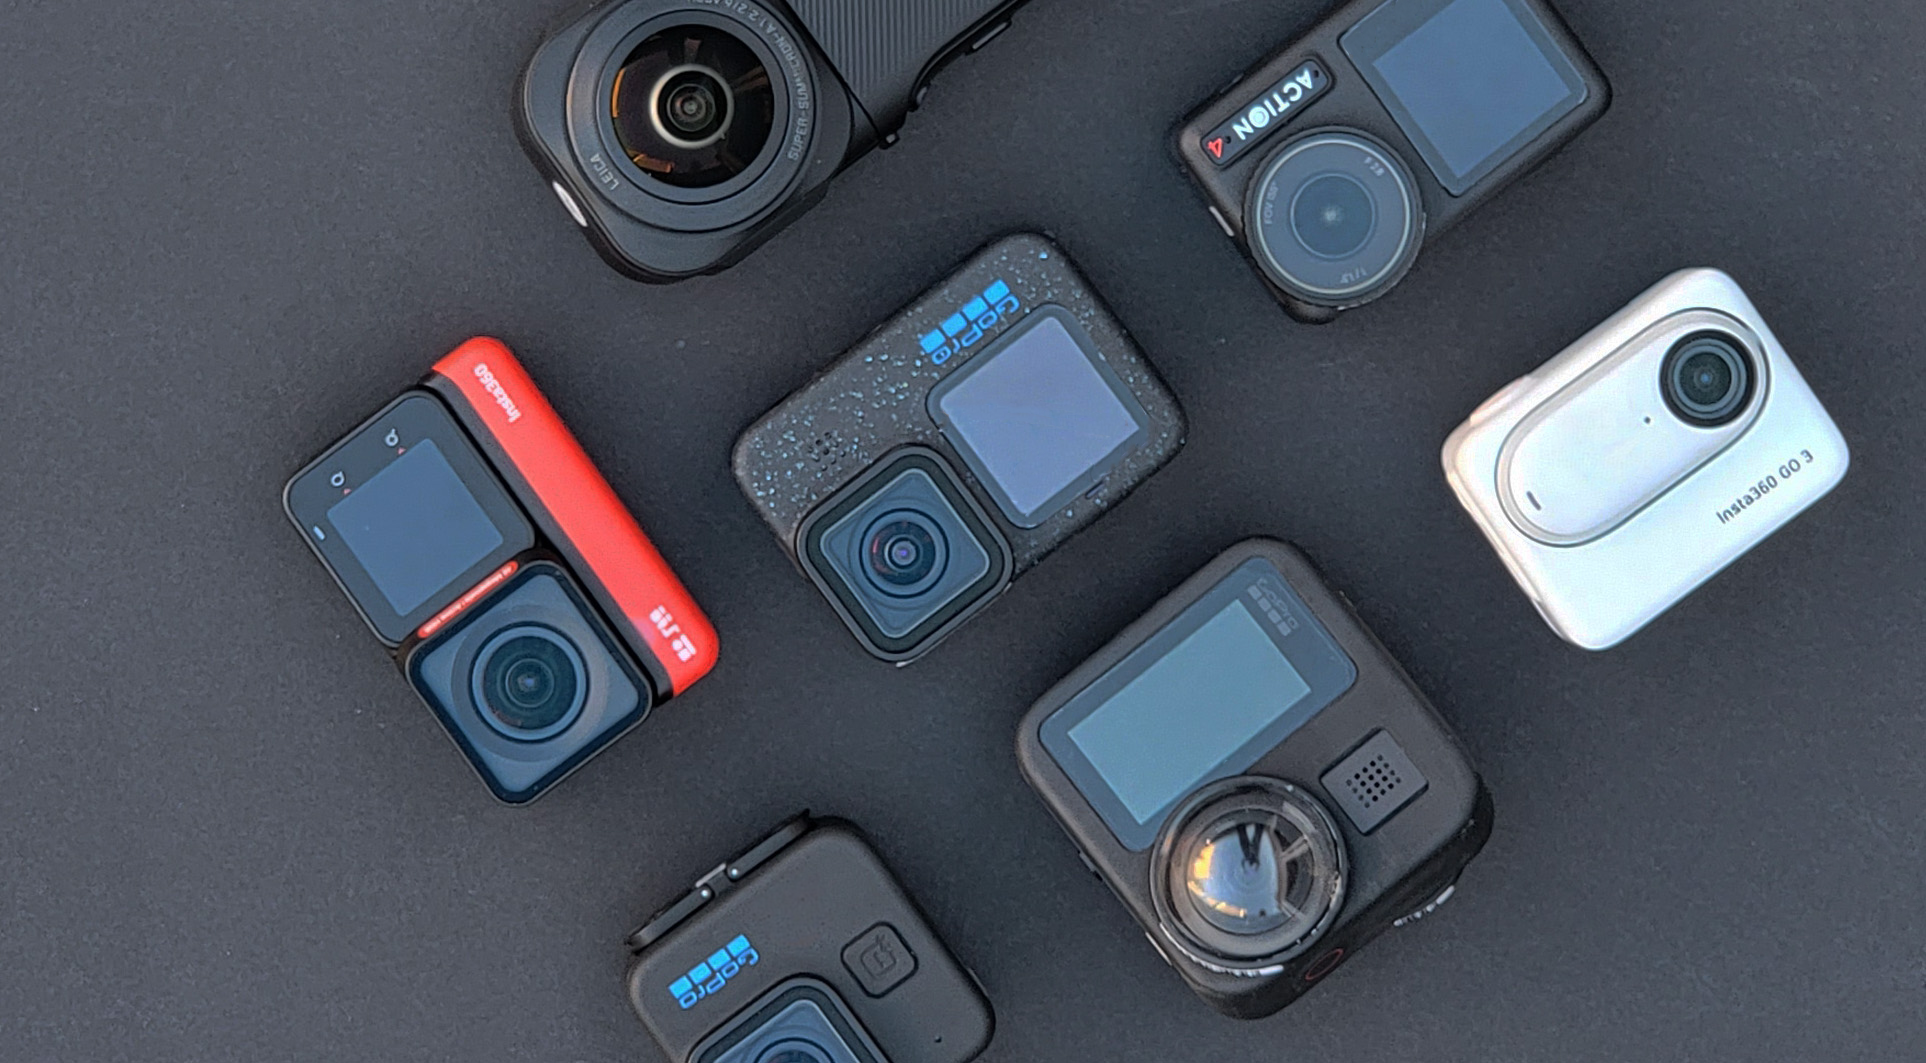 GoPro Max review: We put the 360-degree action cam to the test